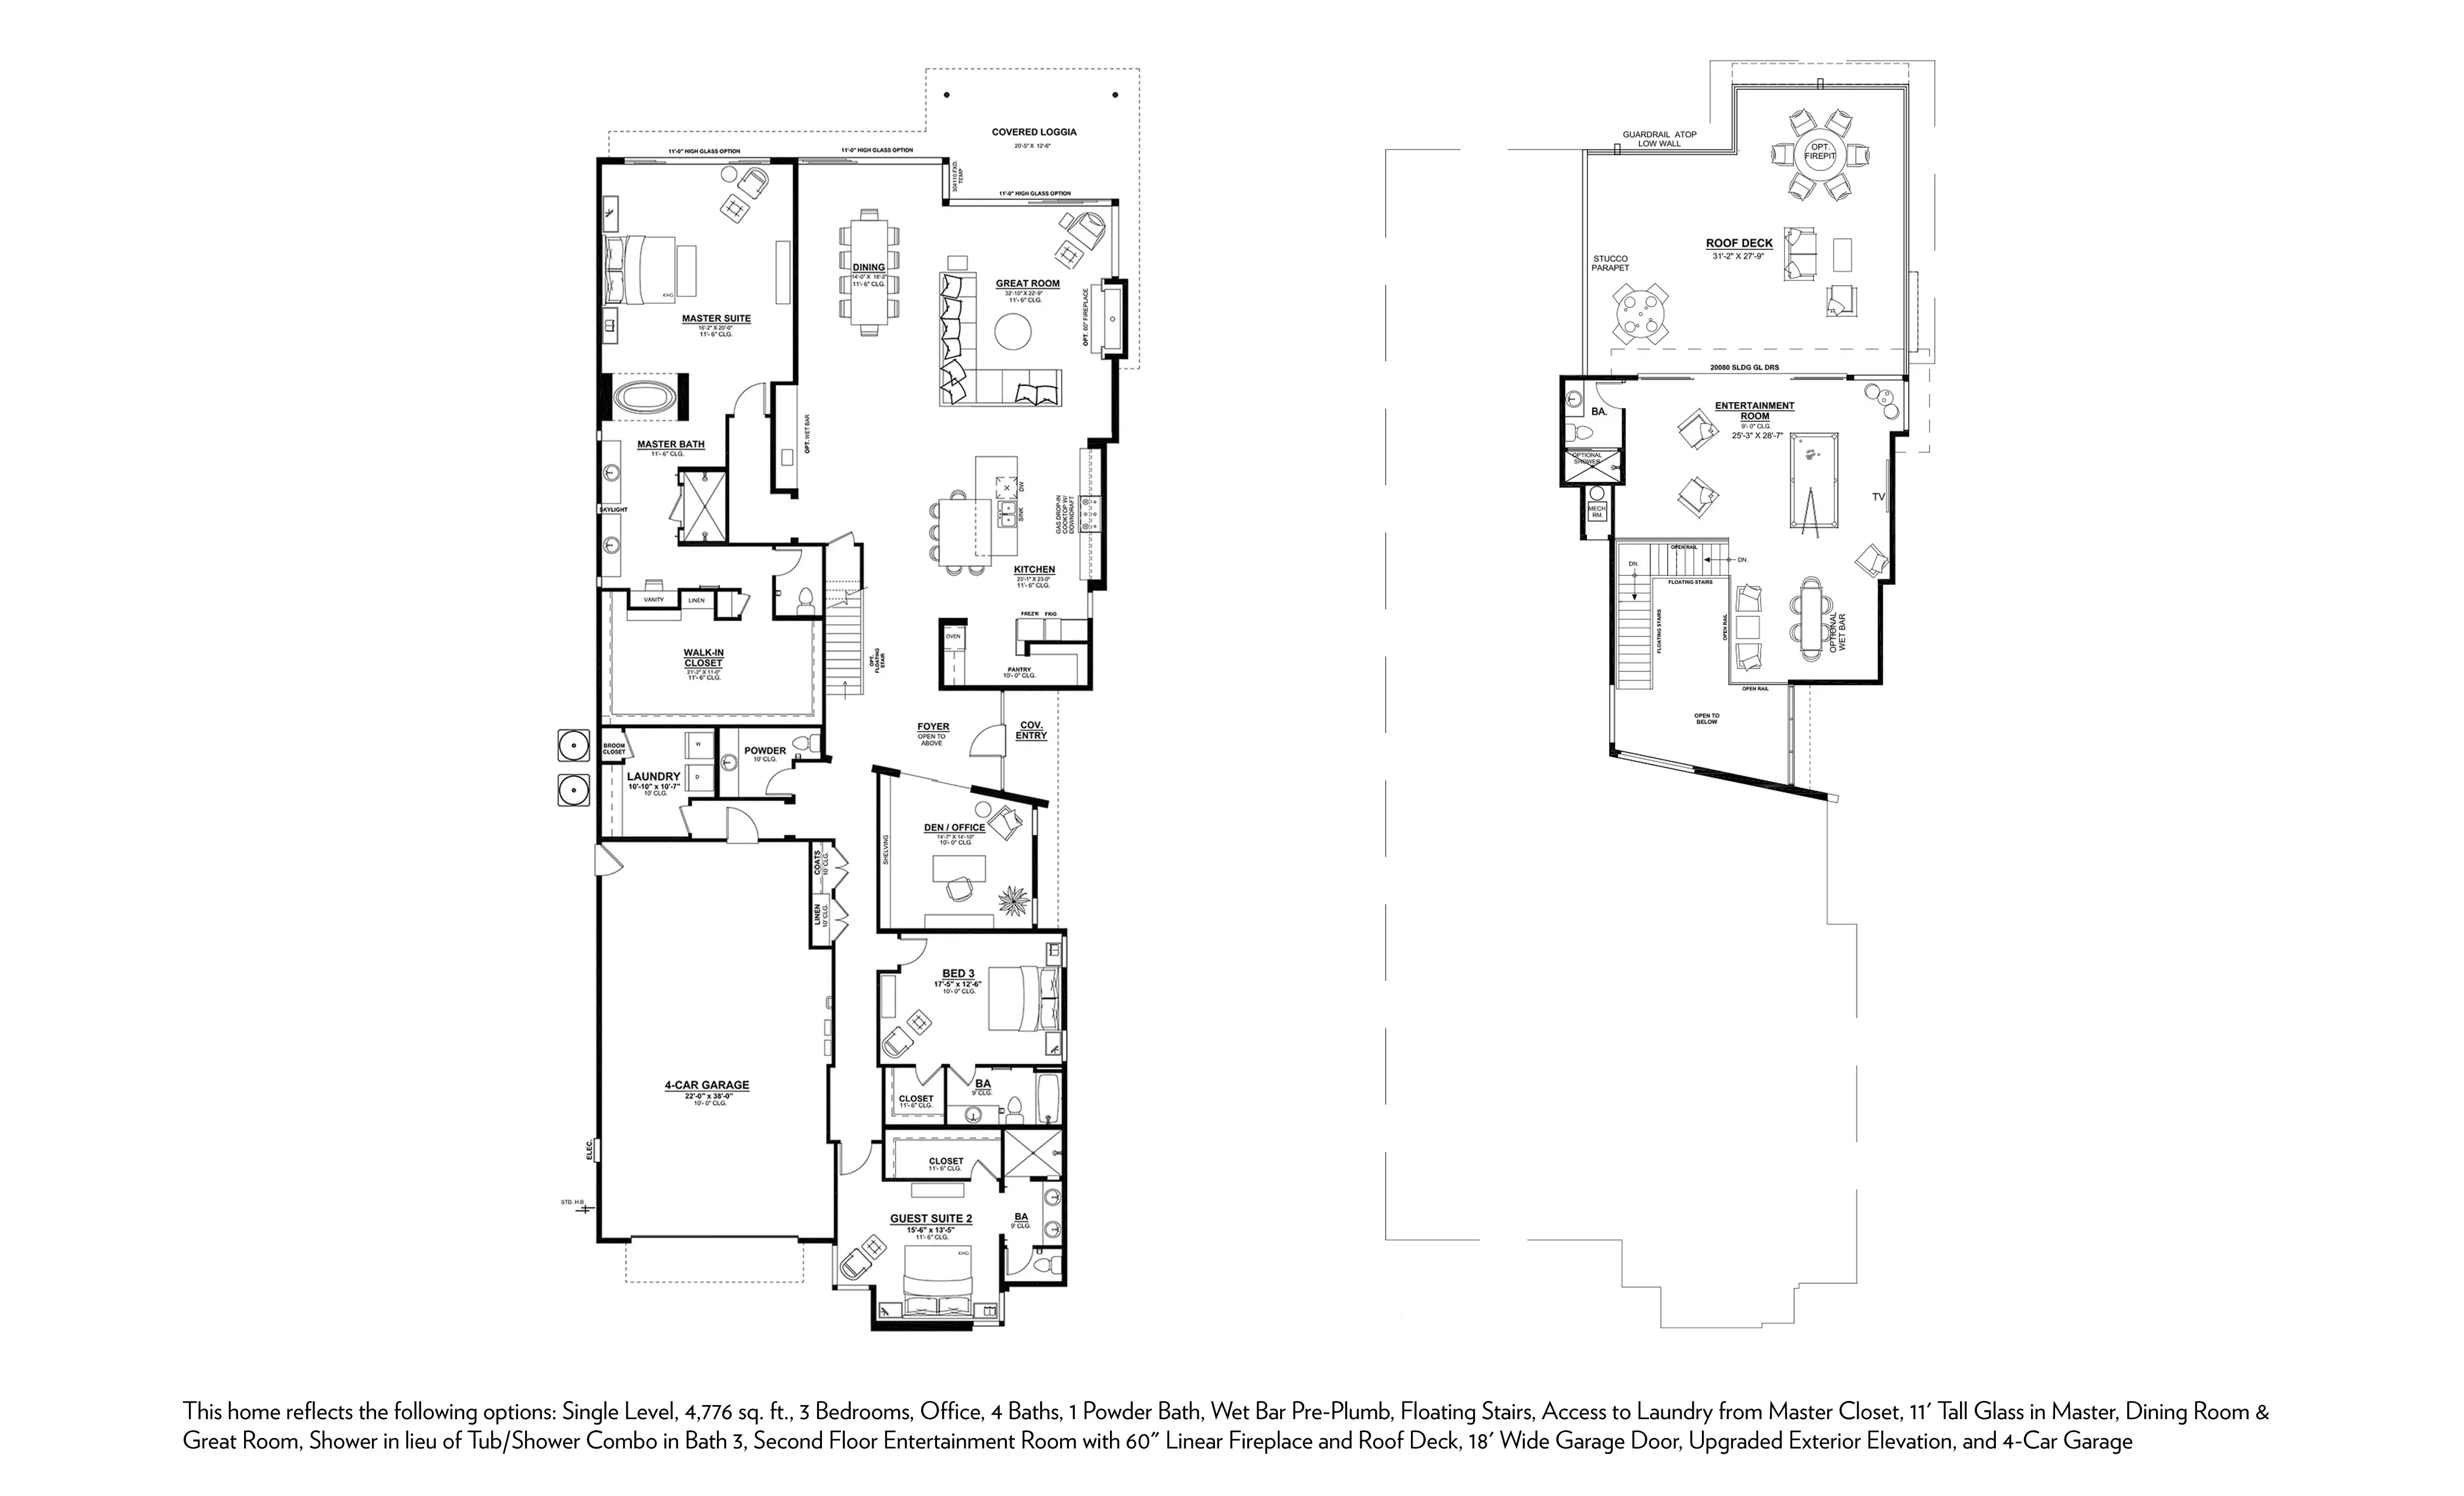 First and Second Floor Floor plans